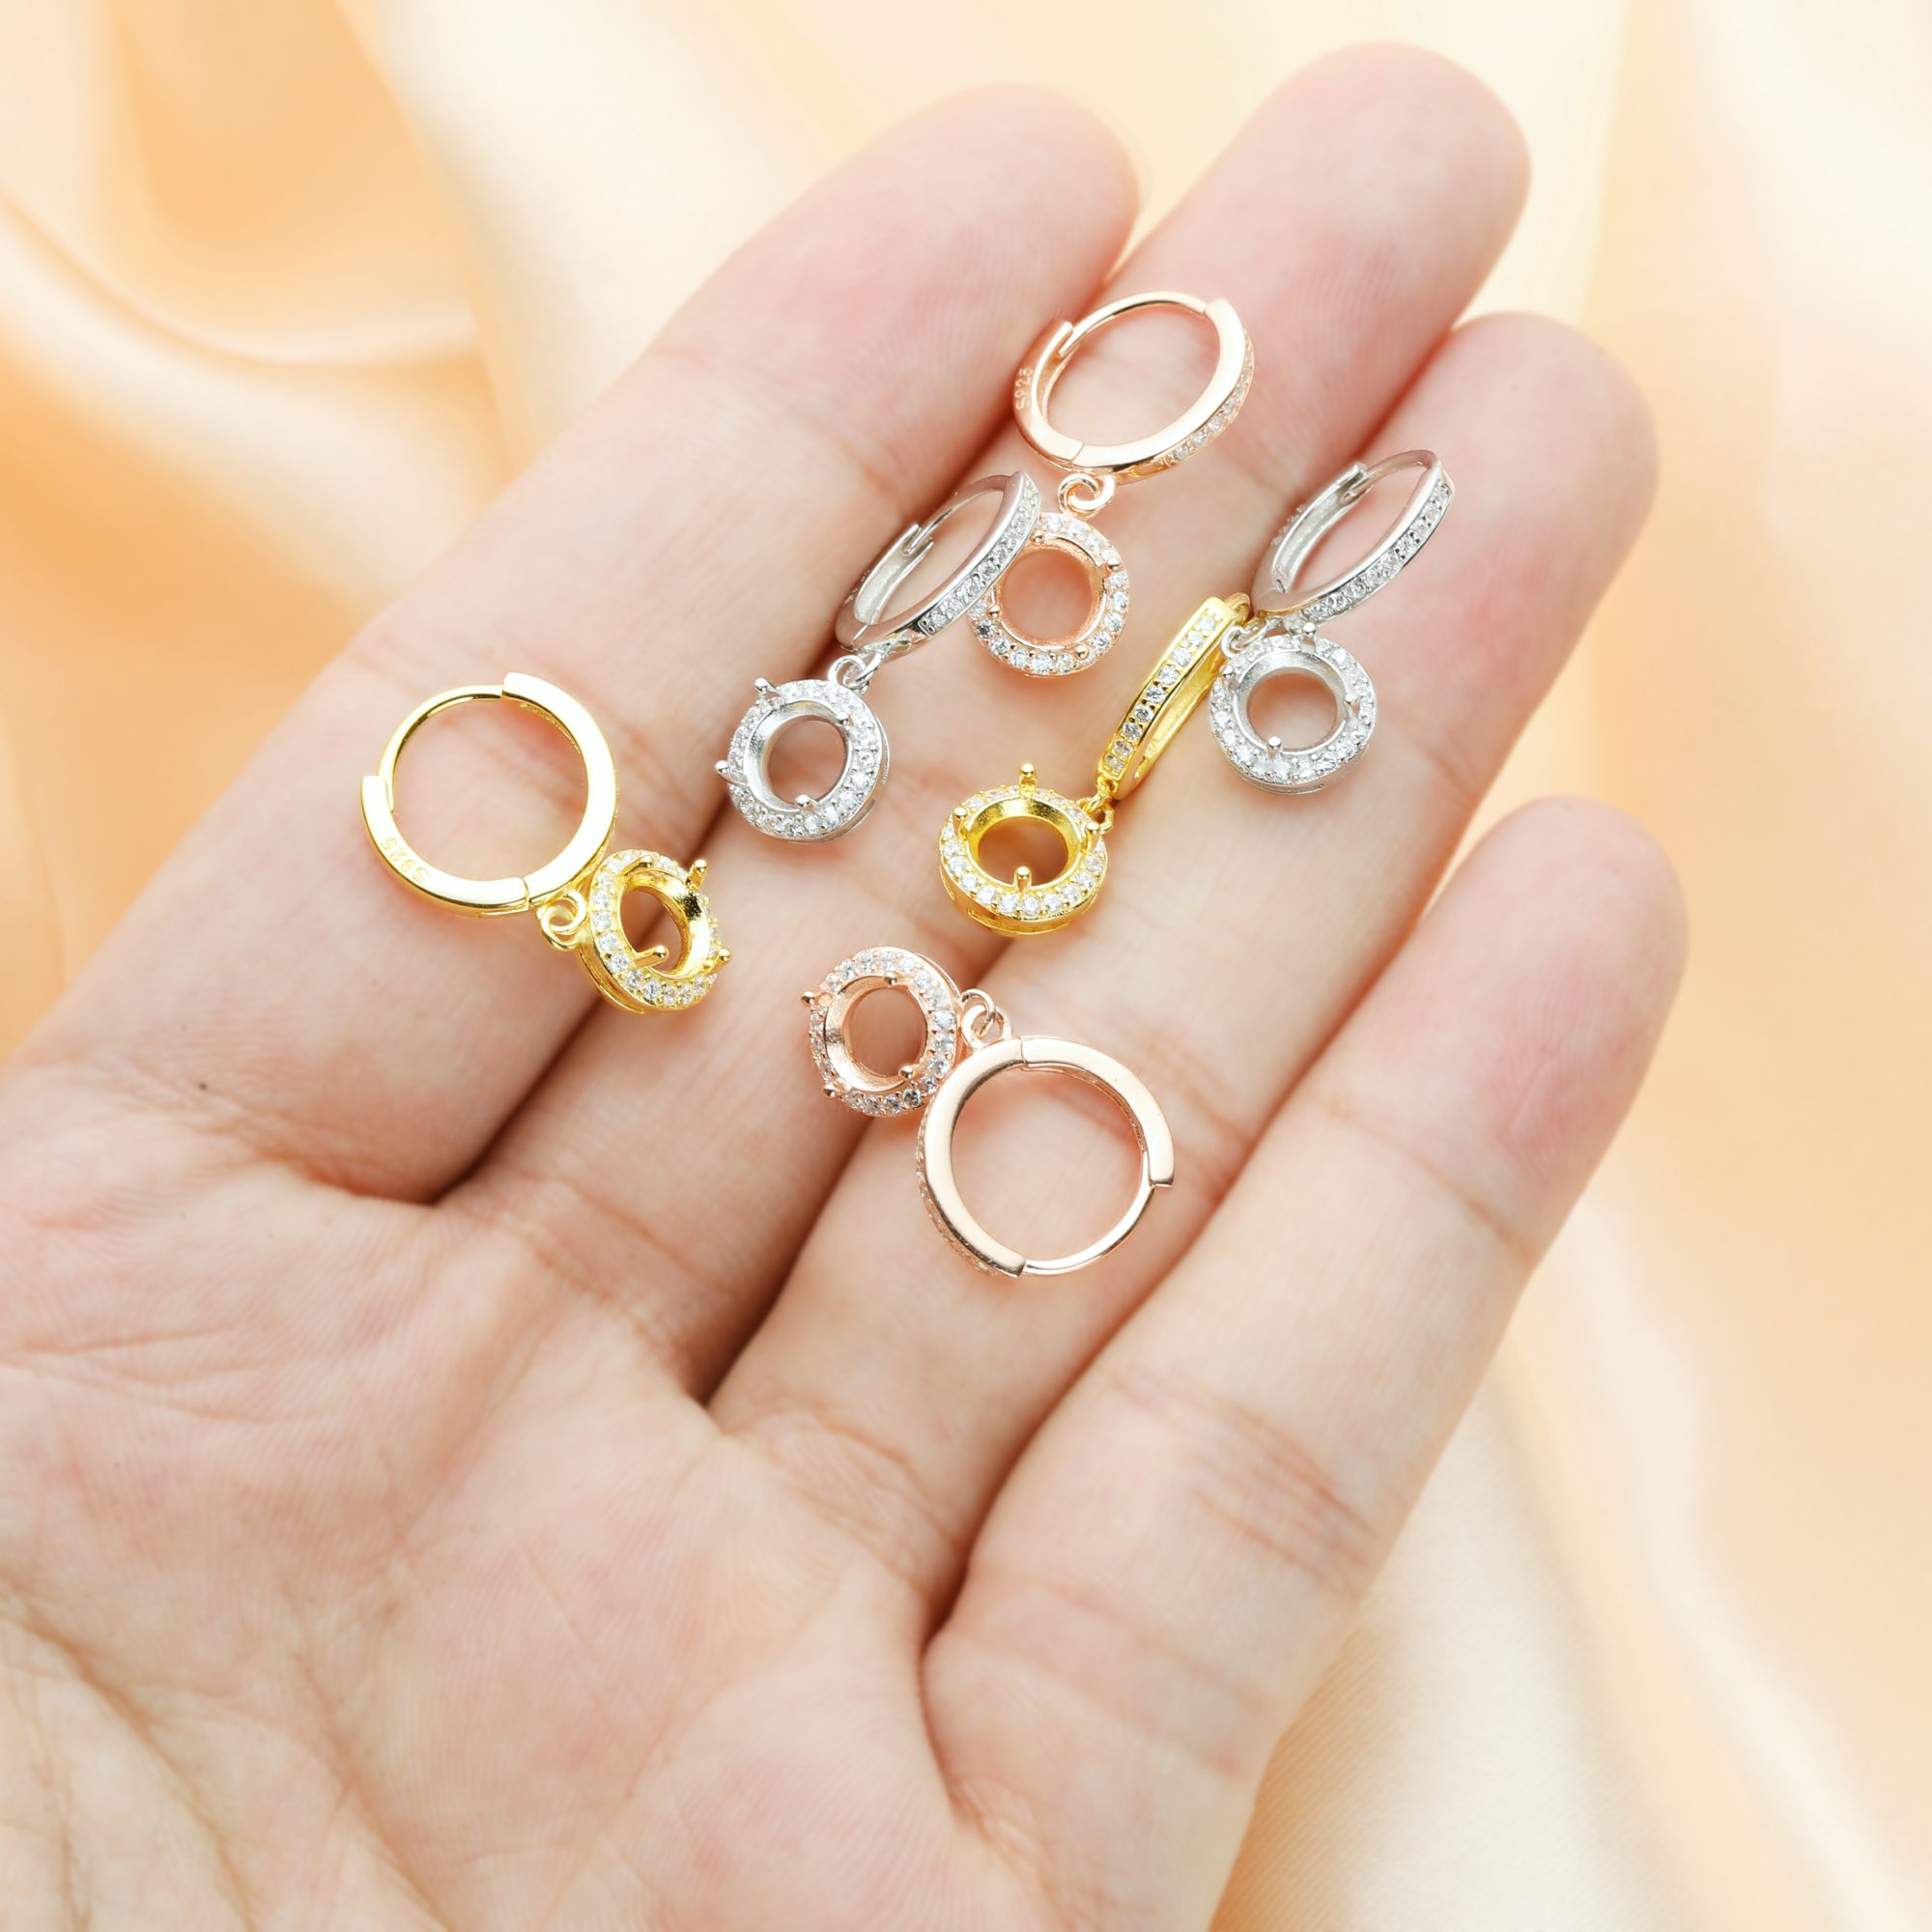 6MM Halo Round Prong Hoop Earrings Settings,Solid 925 Sterling Silver Rose Gold Plated Earrings,Pave CZ Stone Round Earring,DIY Earrings Bezel 1706127 - Click Image to Close